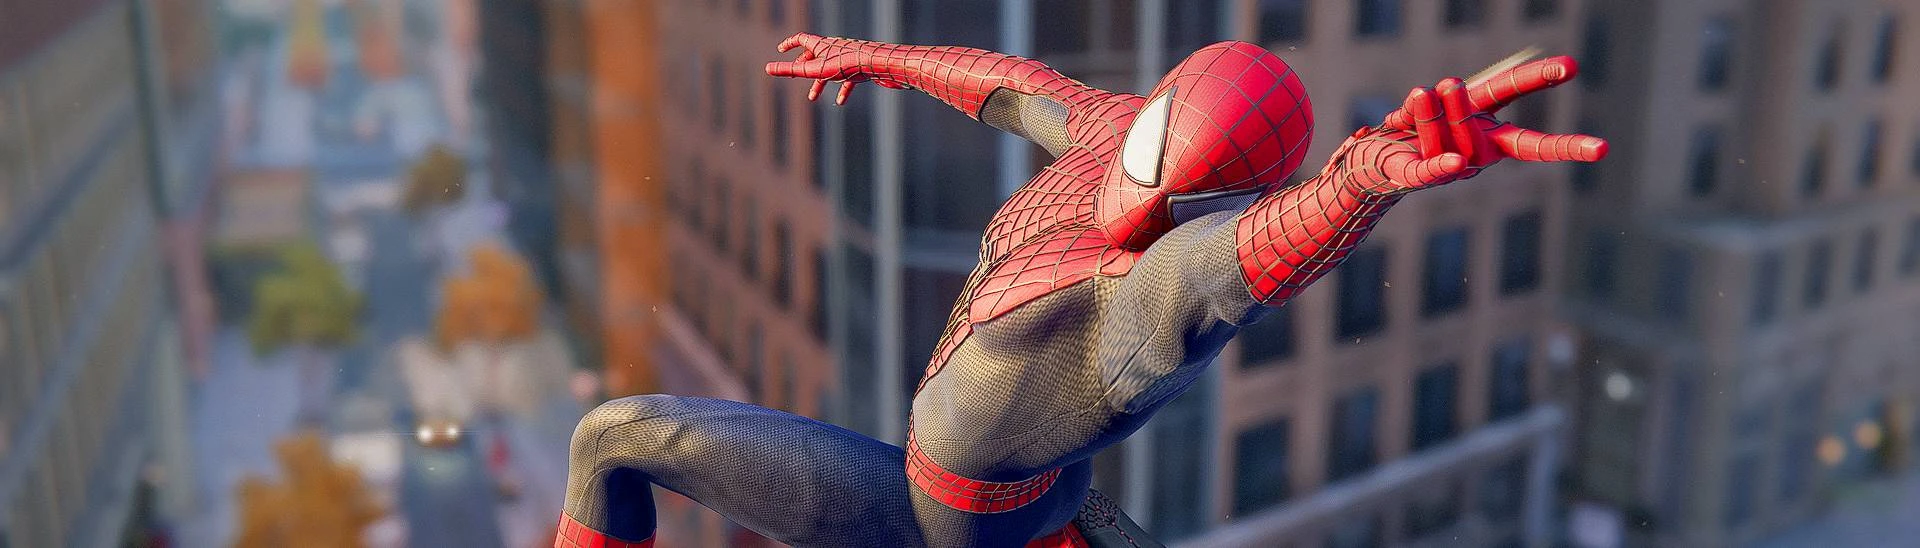 Spider-Man Remastered Venom Mod Swings Out and It Looks Awesome